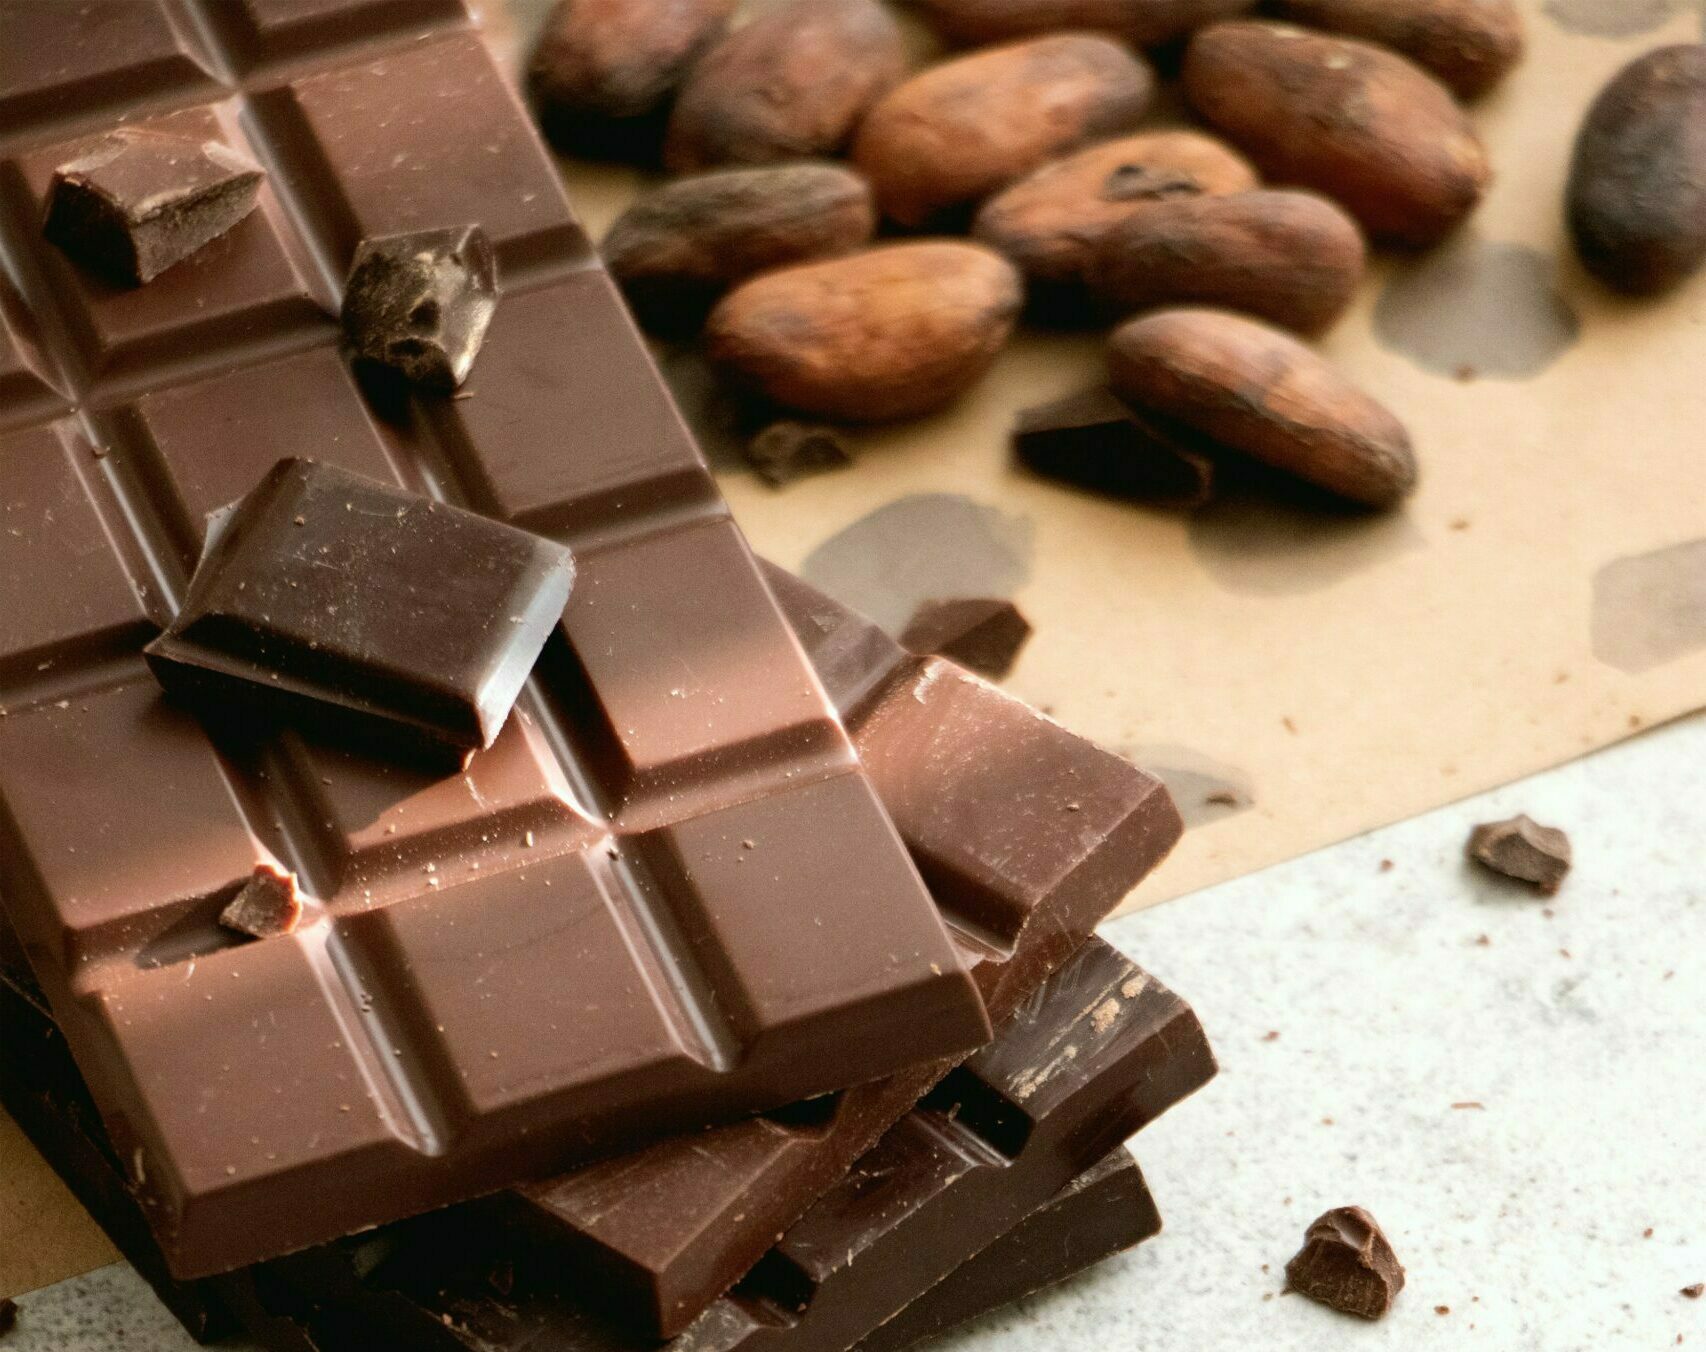 US food giant Mars to buy Britain's Hotel Chocolat for $662m